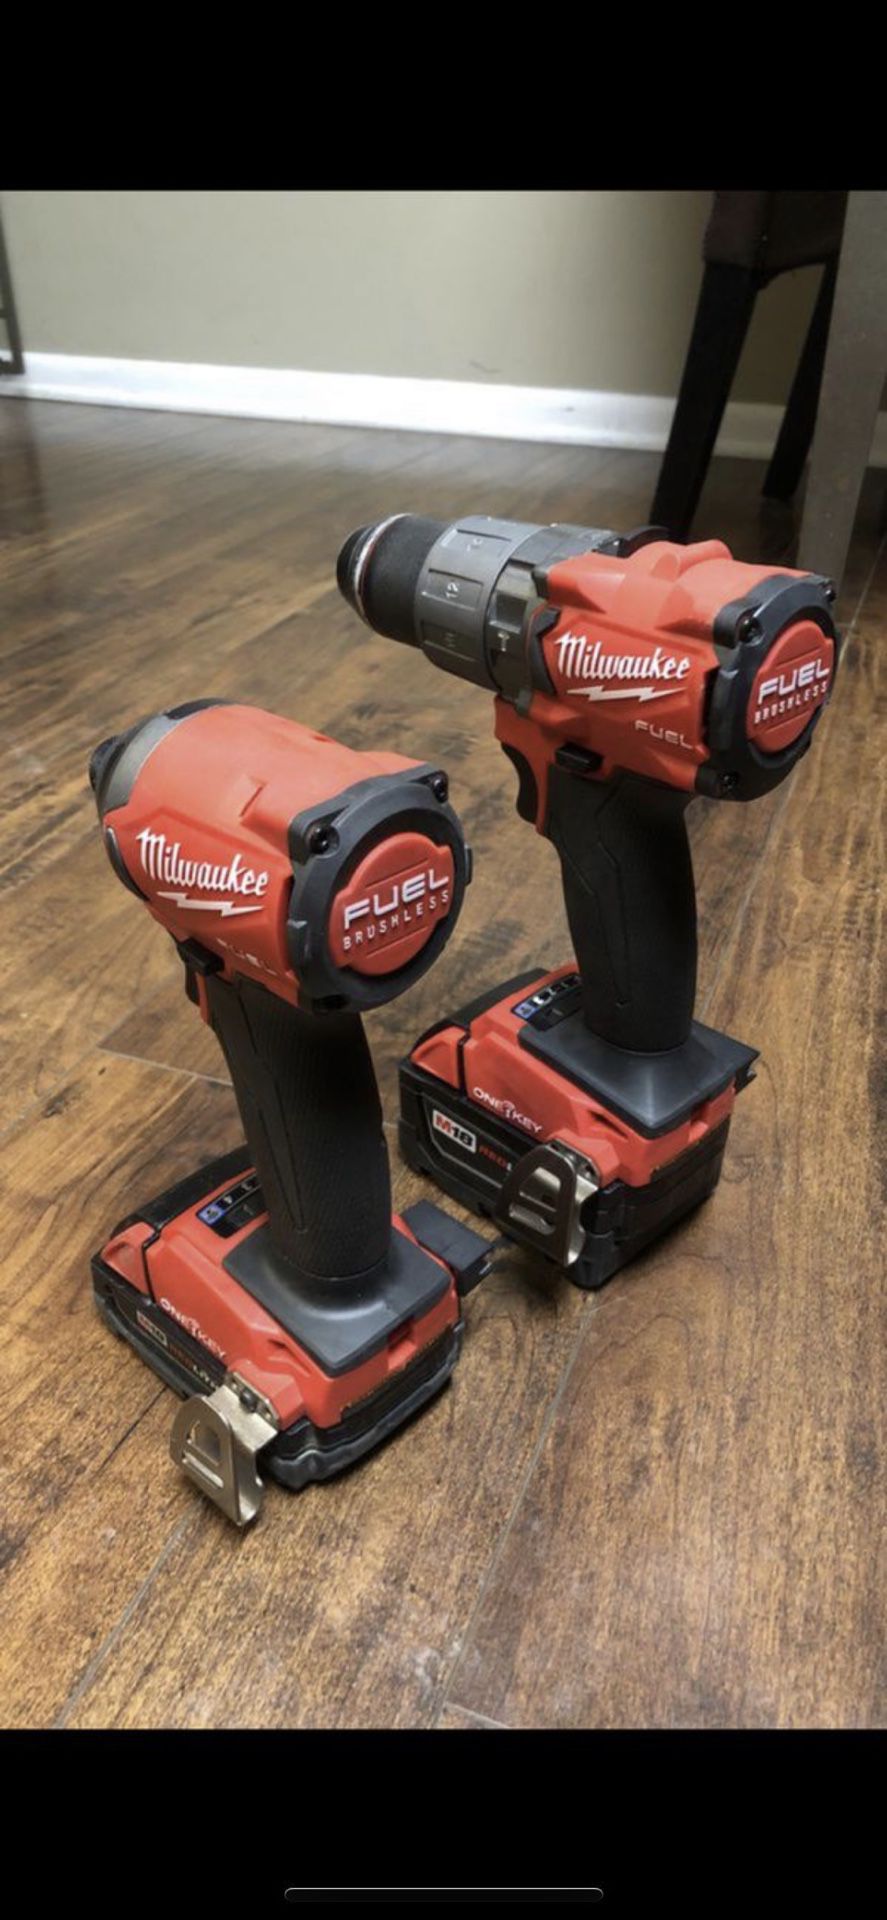 Milwaukee FUEL HAMMER DRILL & IMPACT WITH BATTERIES, CHARGER AND HARD CASE